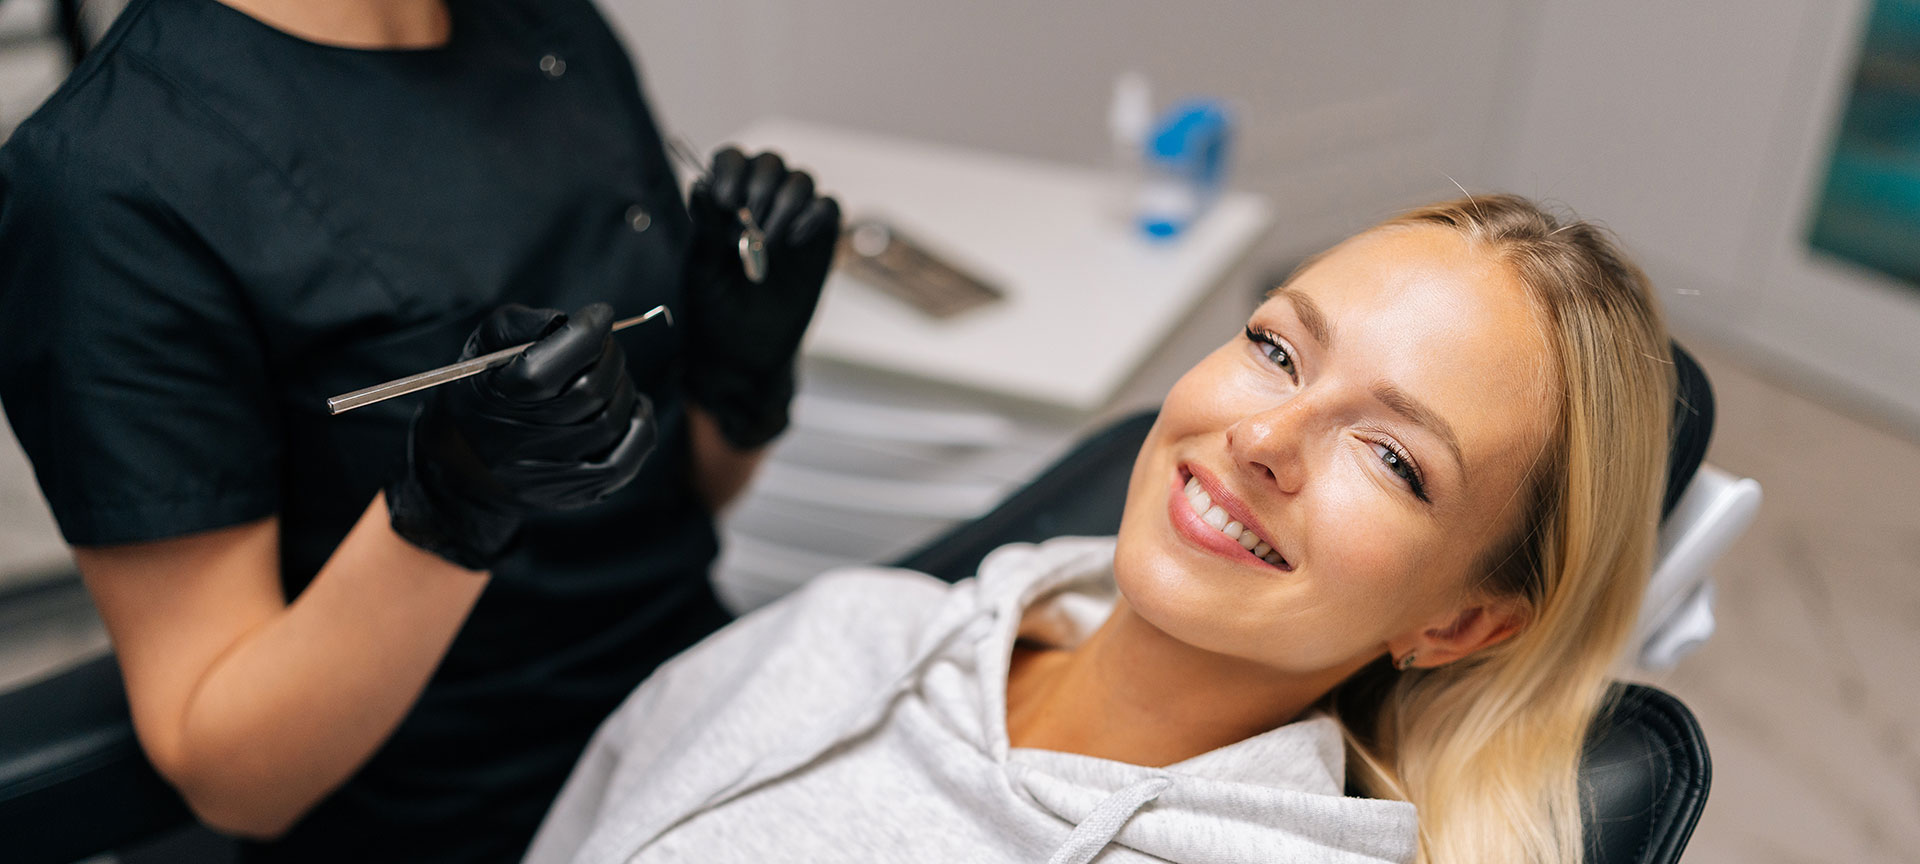 Woman in a hair salon, smiling, with a hairstylist cutting her hair.